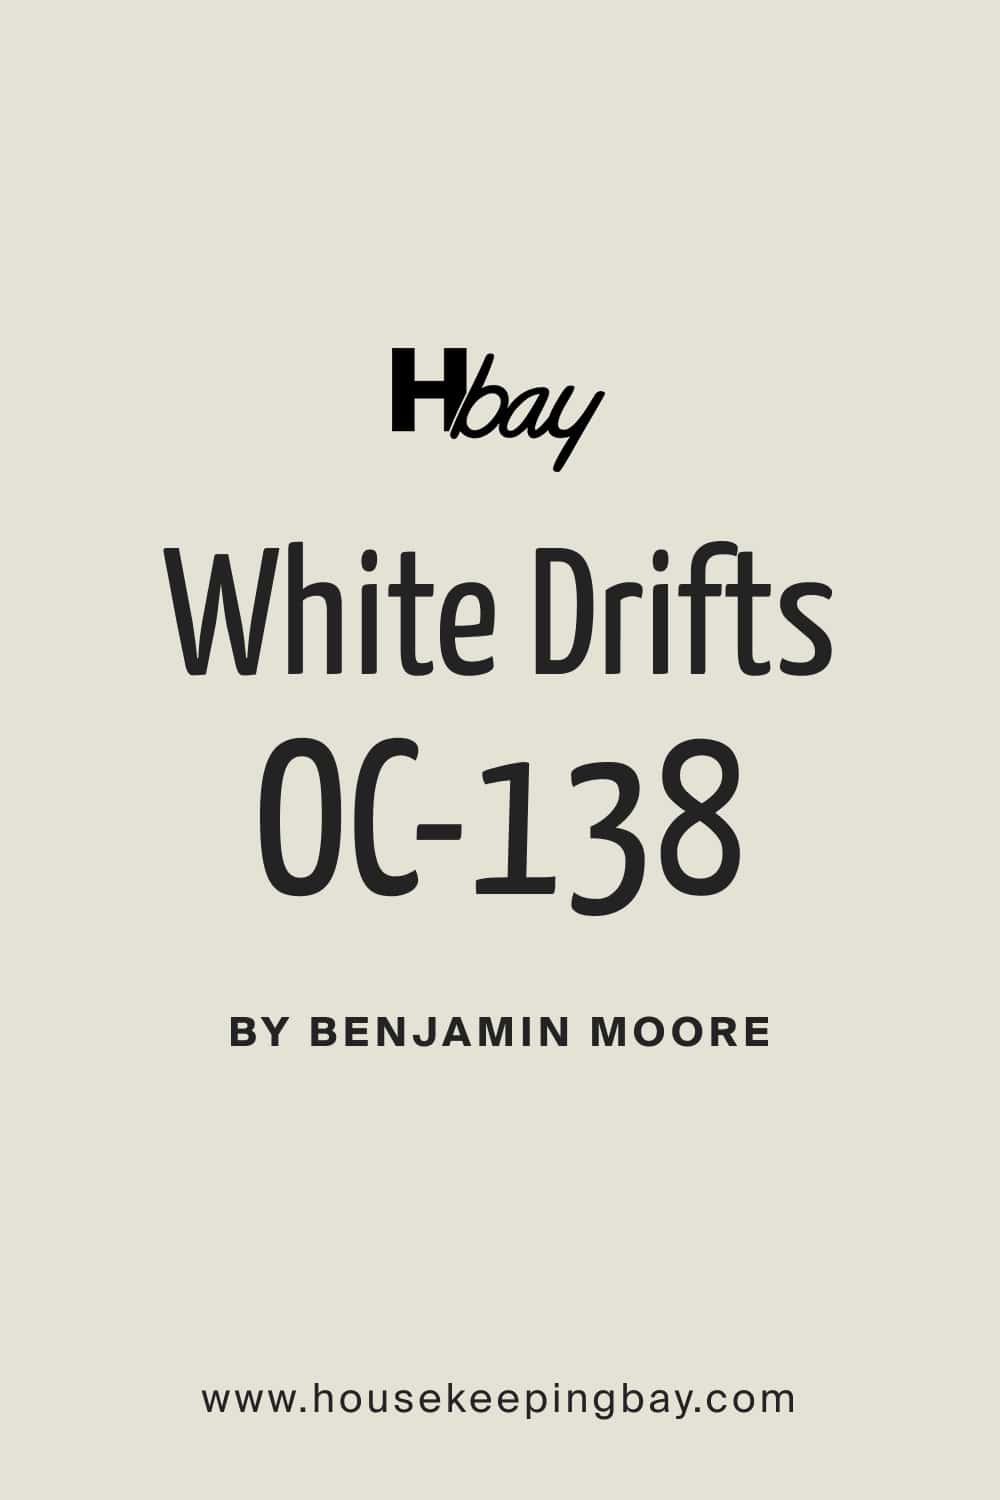 White Drifts OC 138 by Benjamin Moore